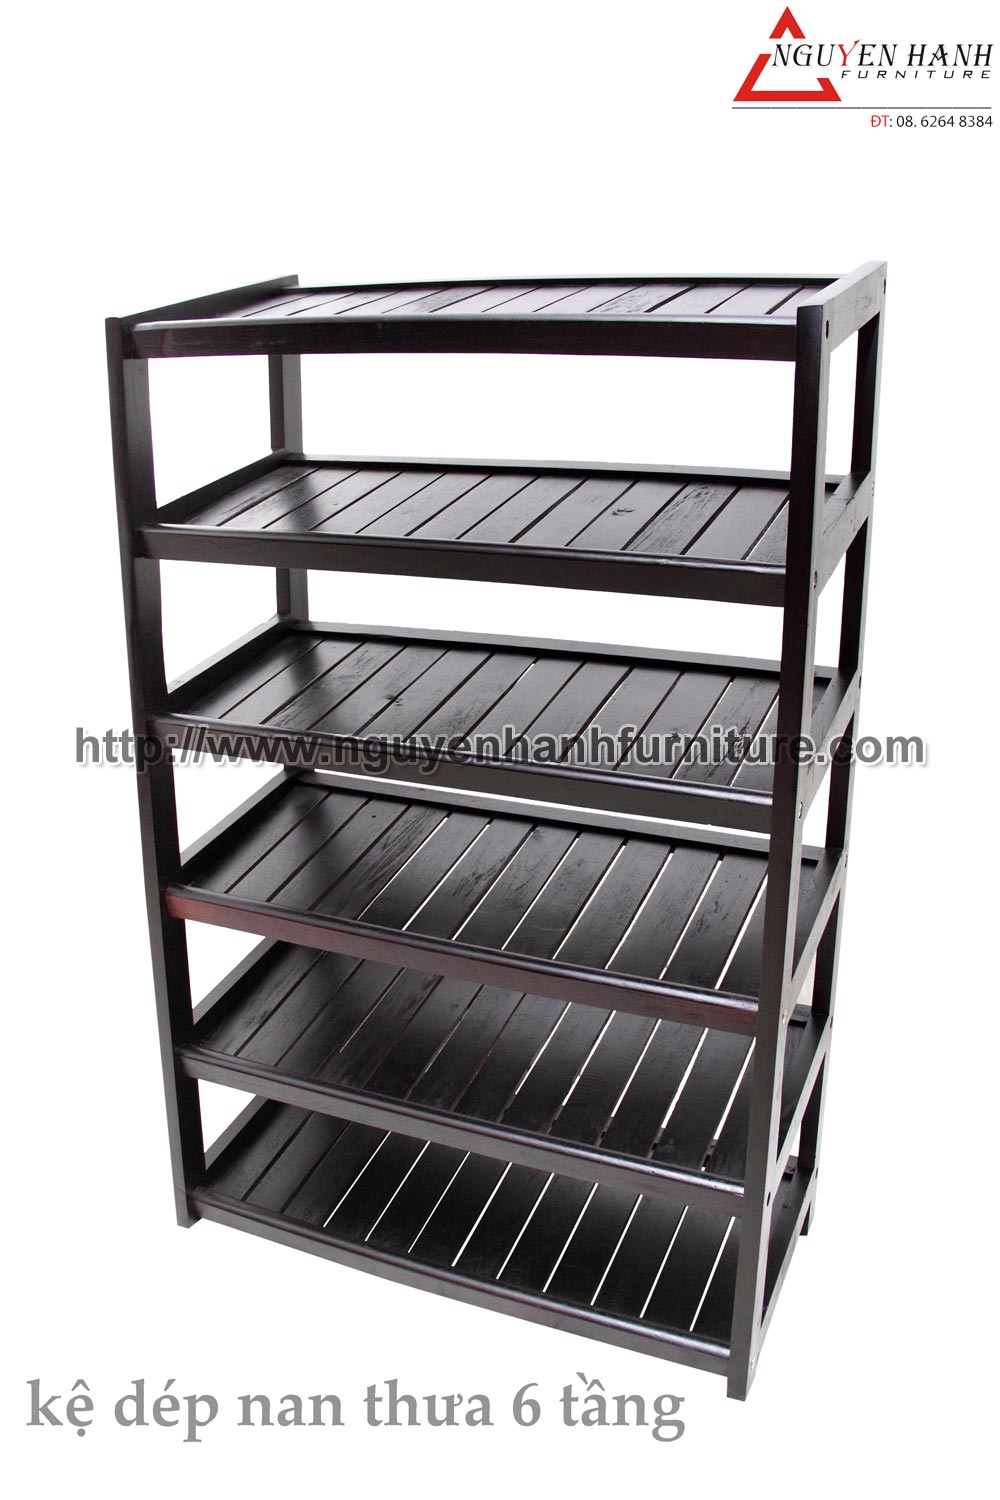 Name product: 6 storey Shoeshelf with sparse blades (Black) - Dimensions: 62 x 30 x 98 (H) - Description: Wood natural rubber